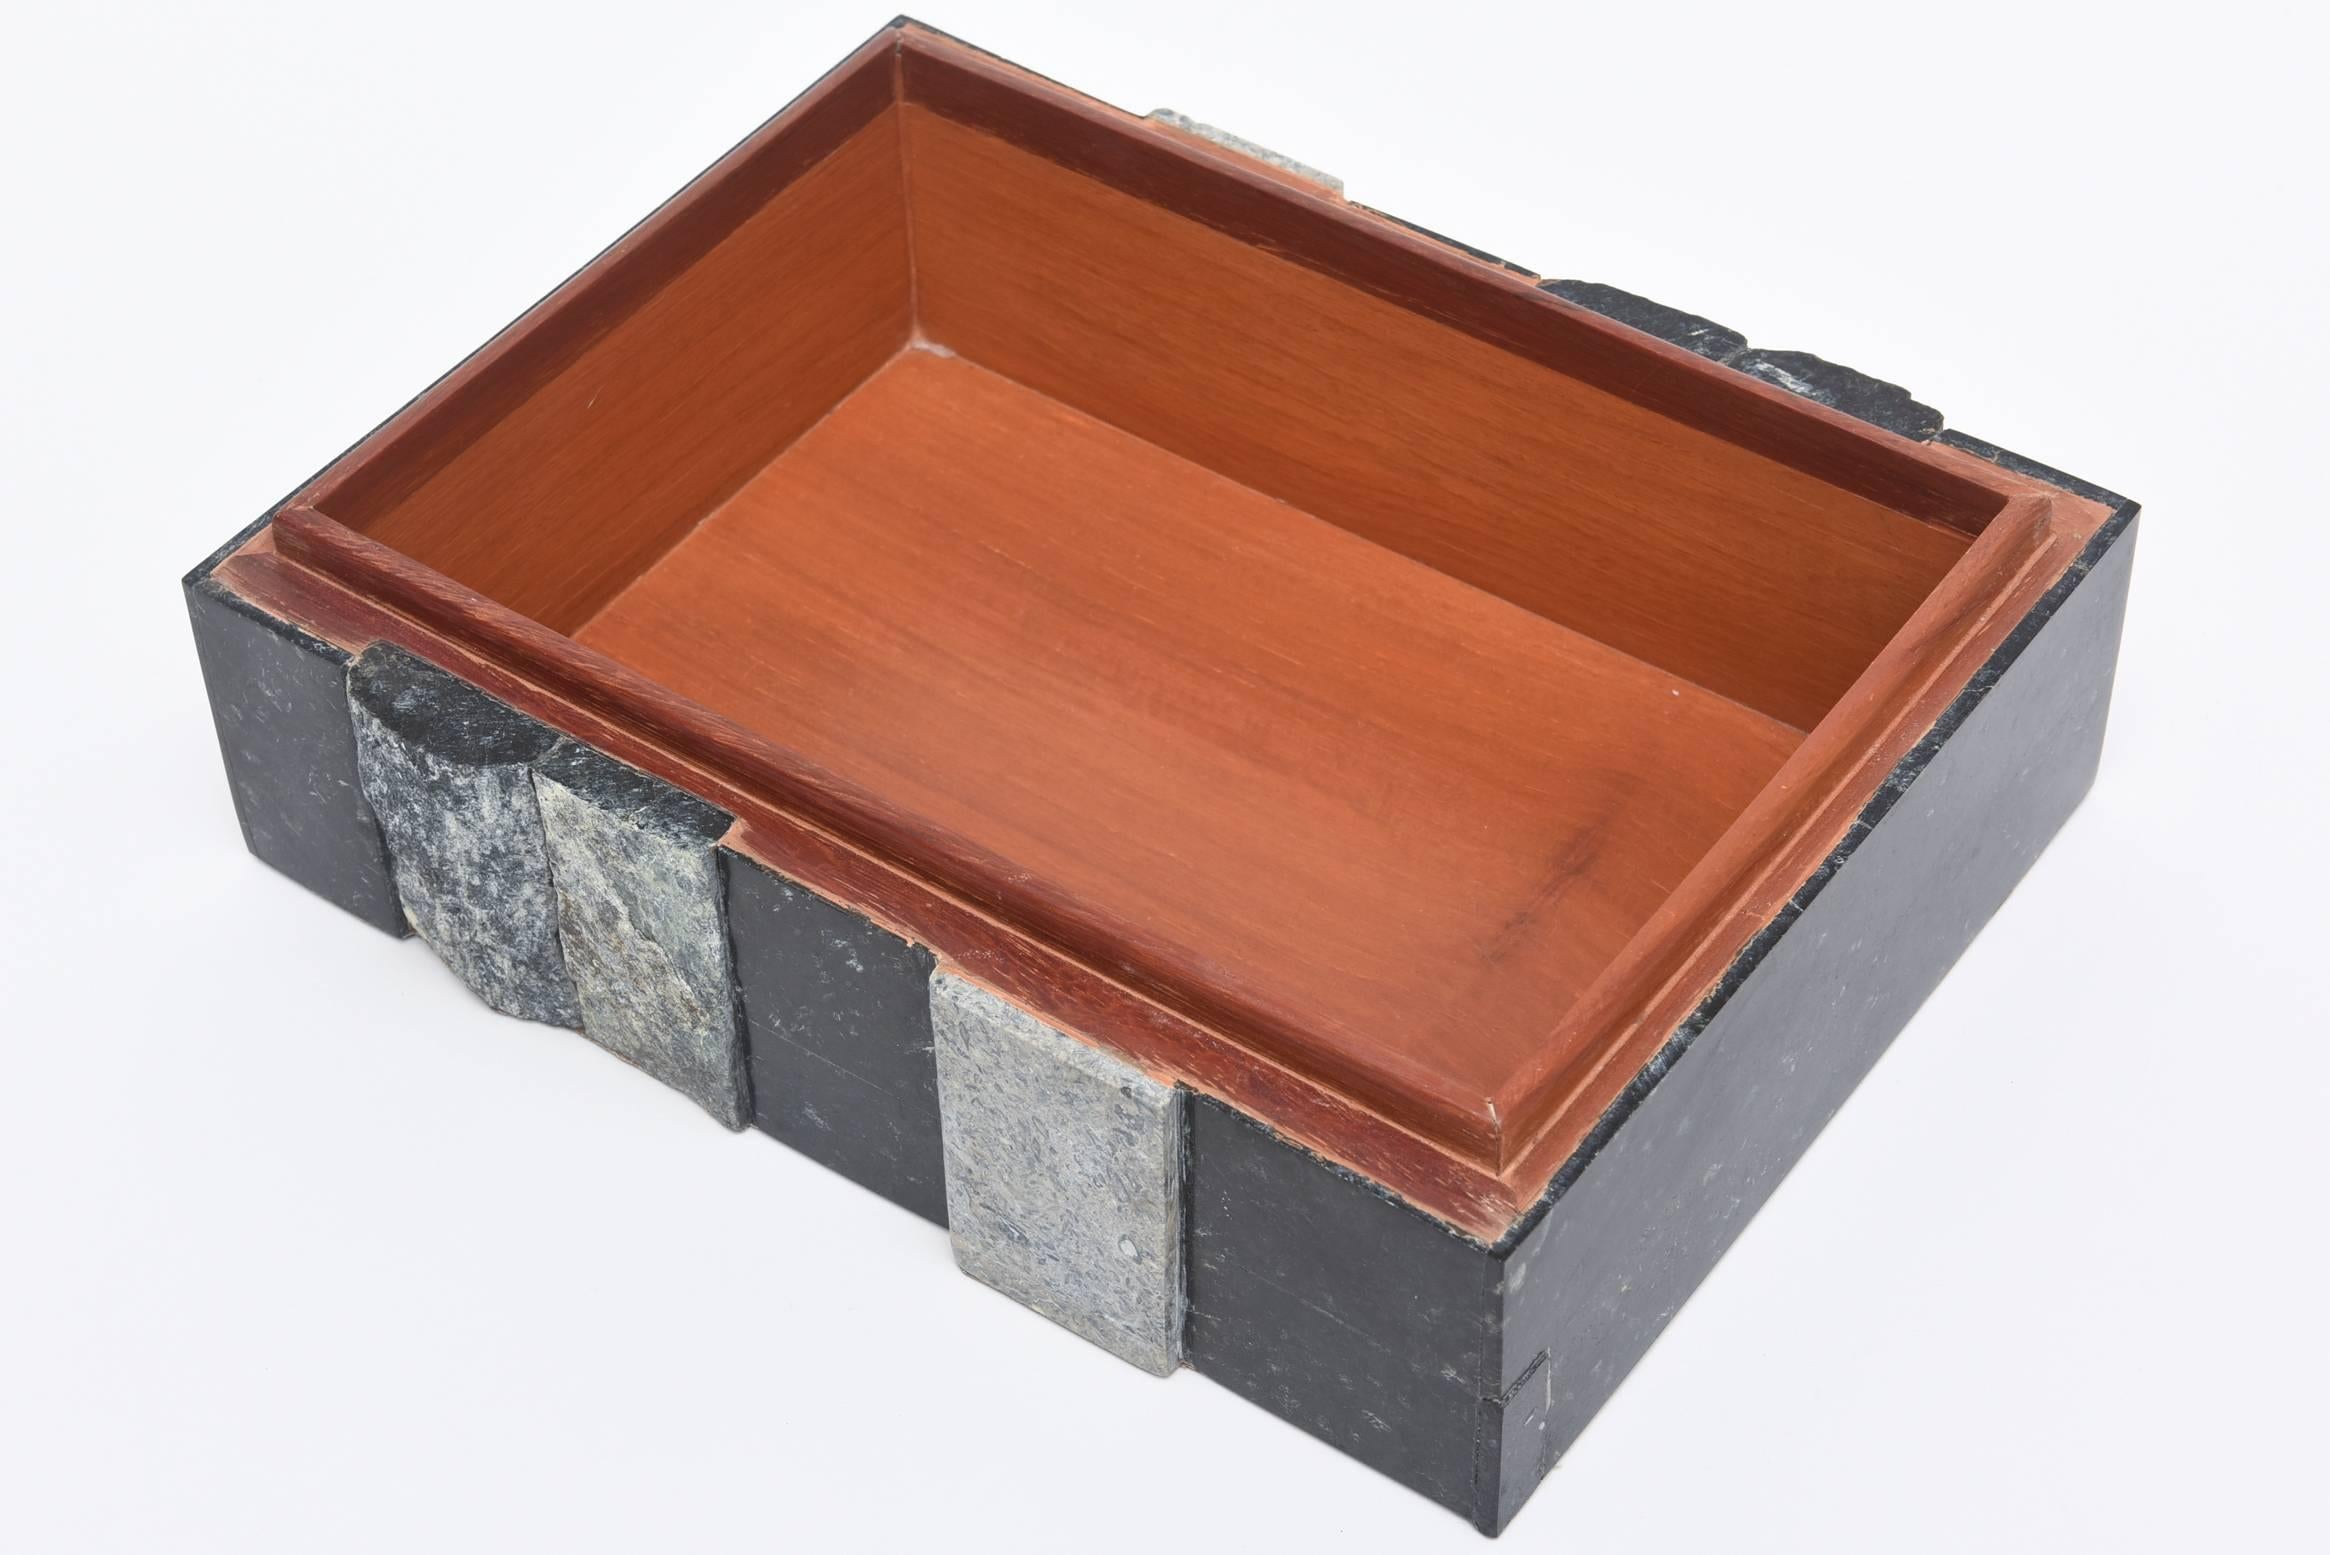 American Textural Polished and Unpolished Stone and Wood Large Sculptural Box